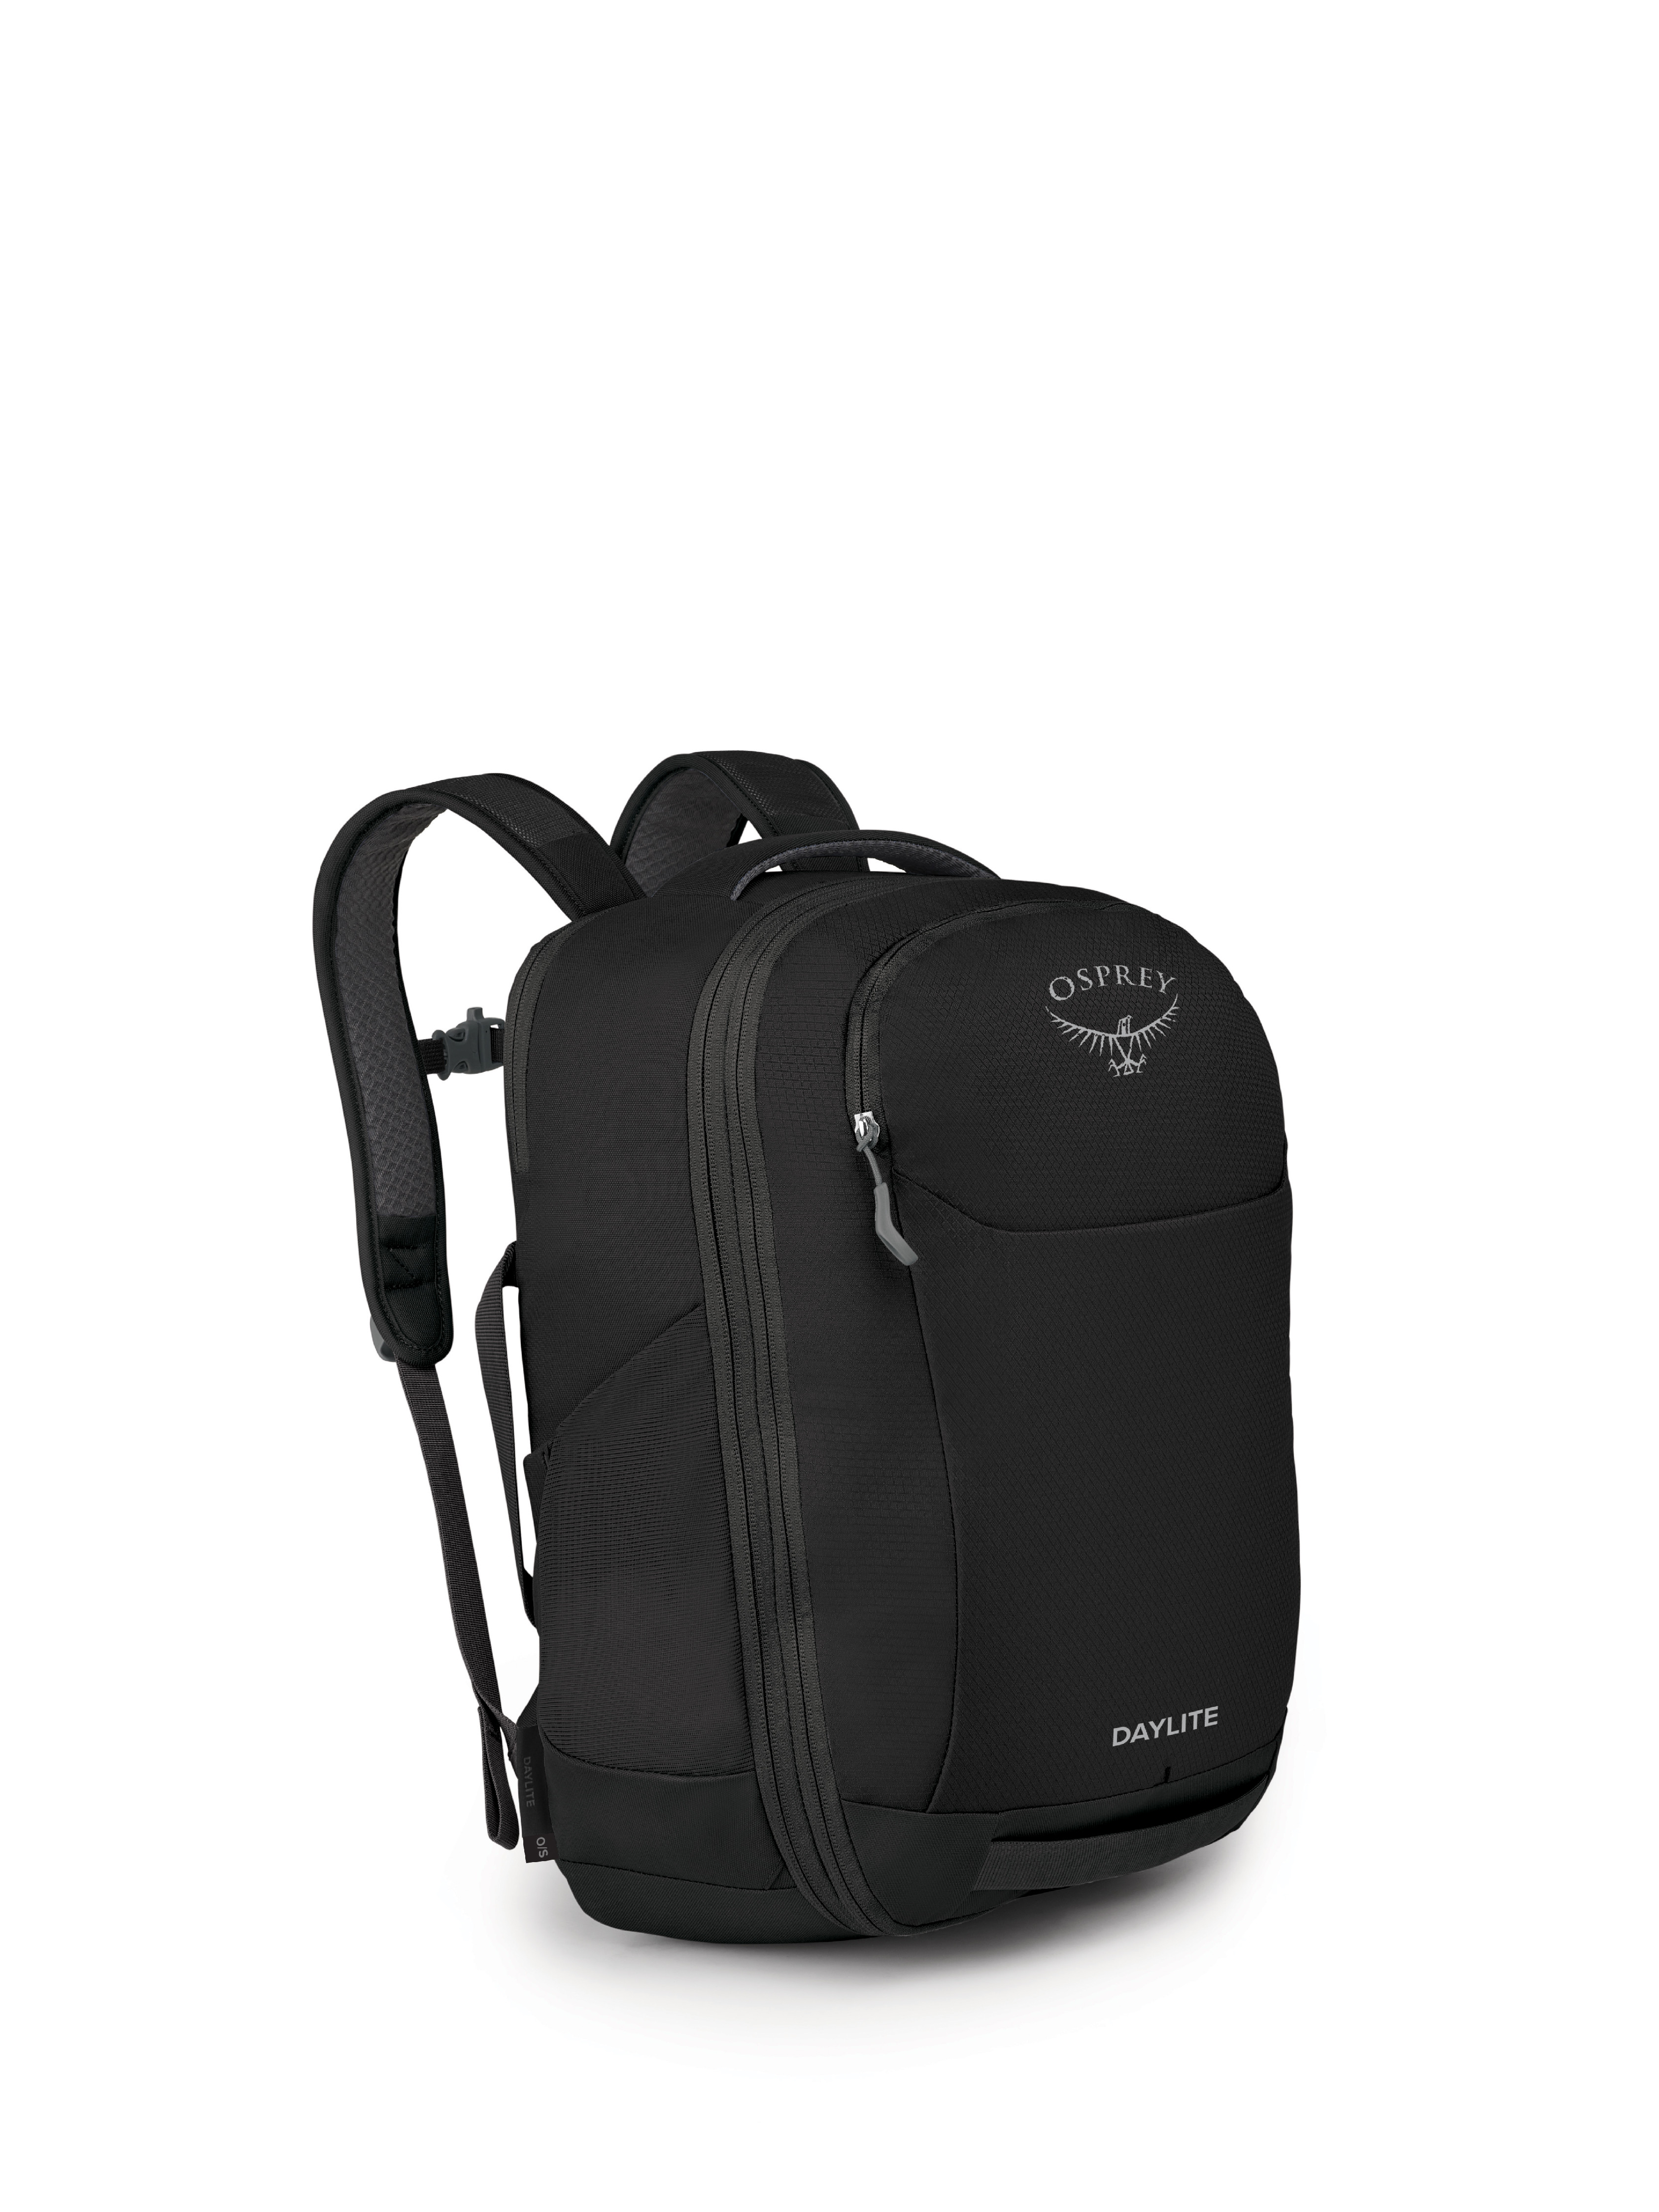 OSPREY DAYLITE EXPANDIBLE TRAVEL PACK 26+6